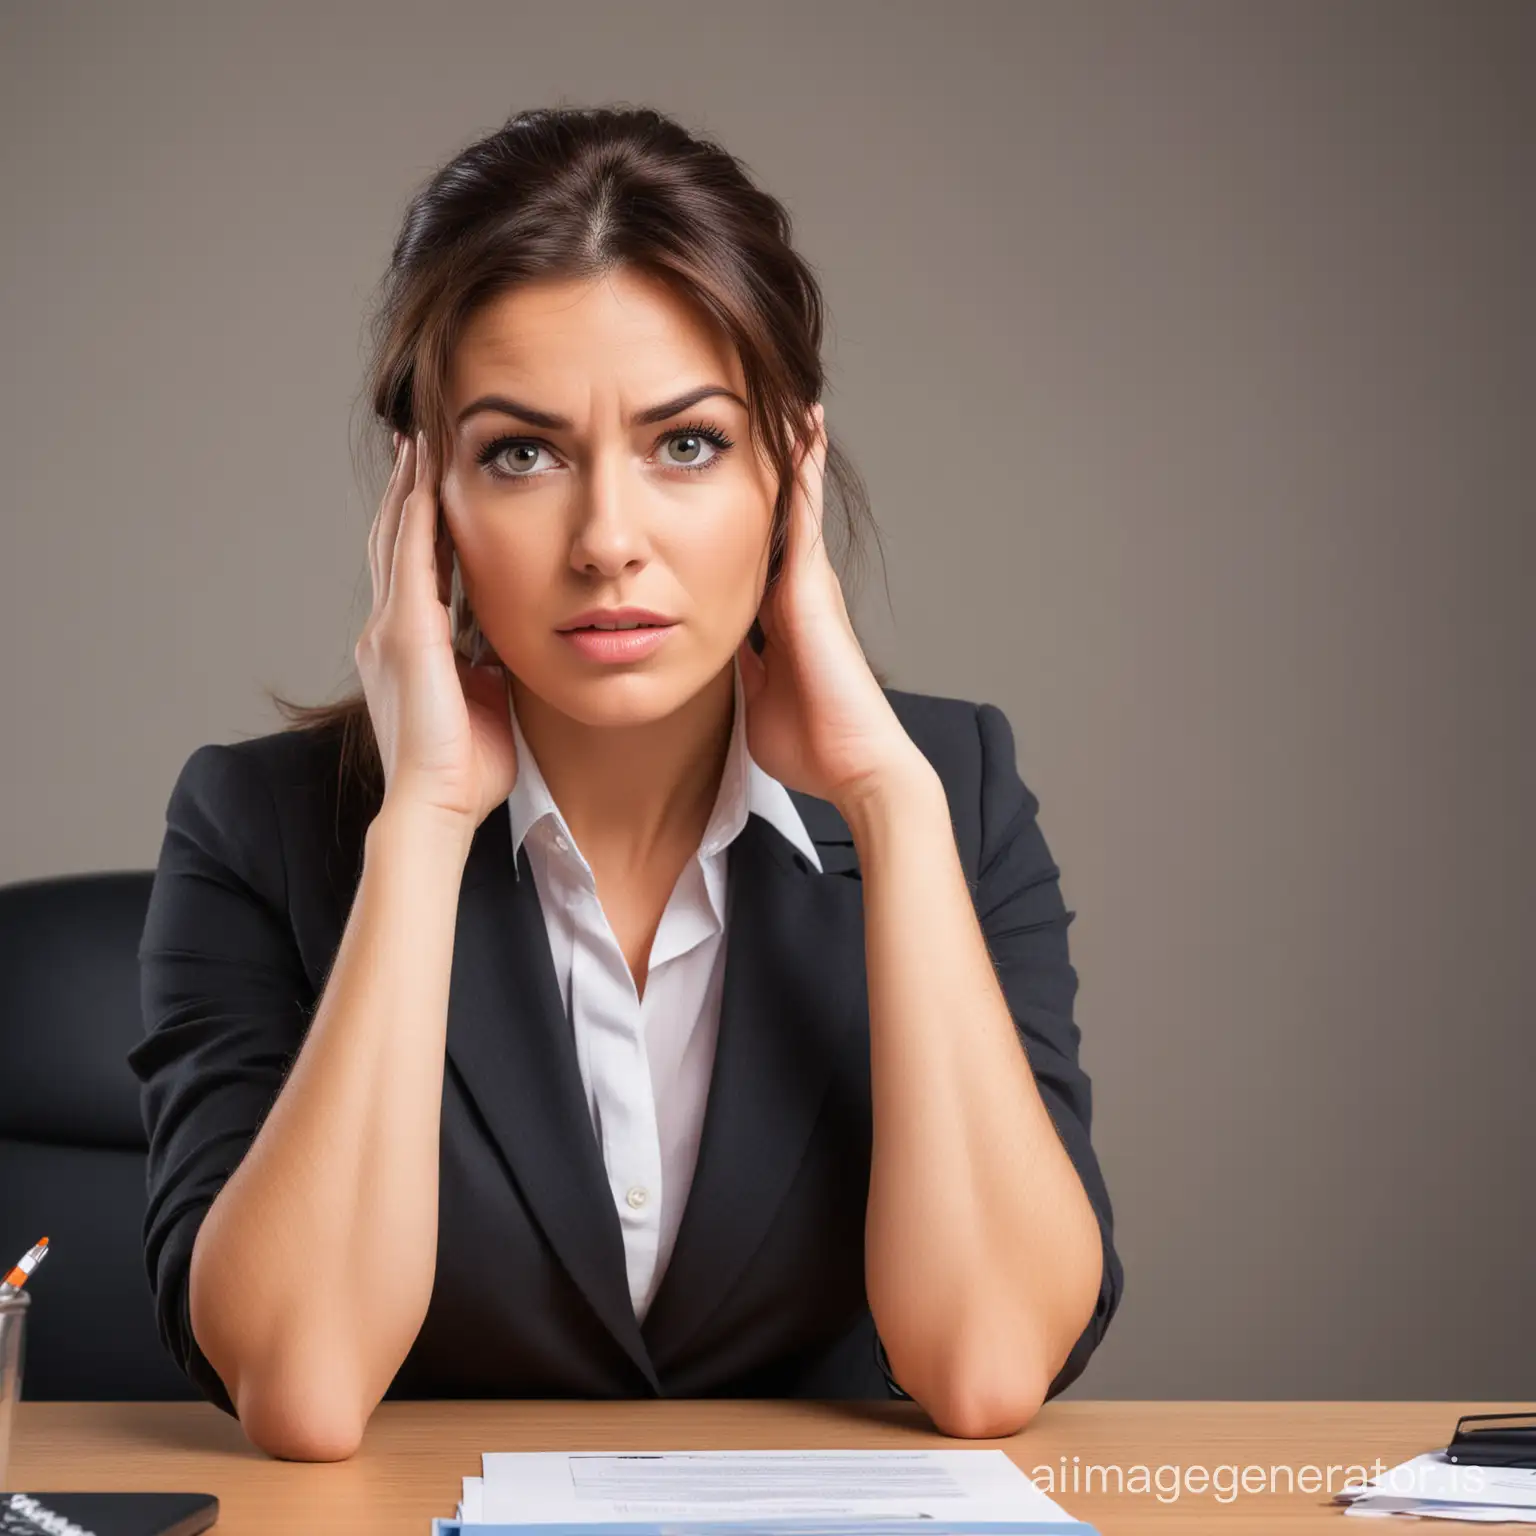 Stressed-Businesswoman-Overwhelmed-by-Workplace-Challenges